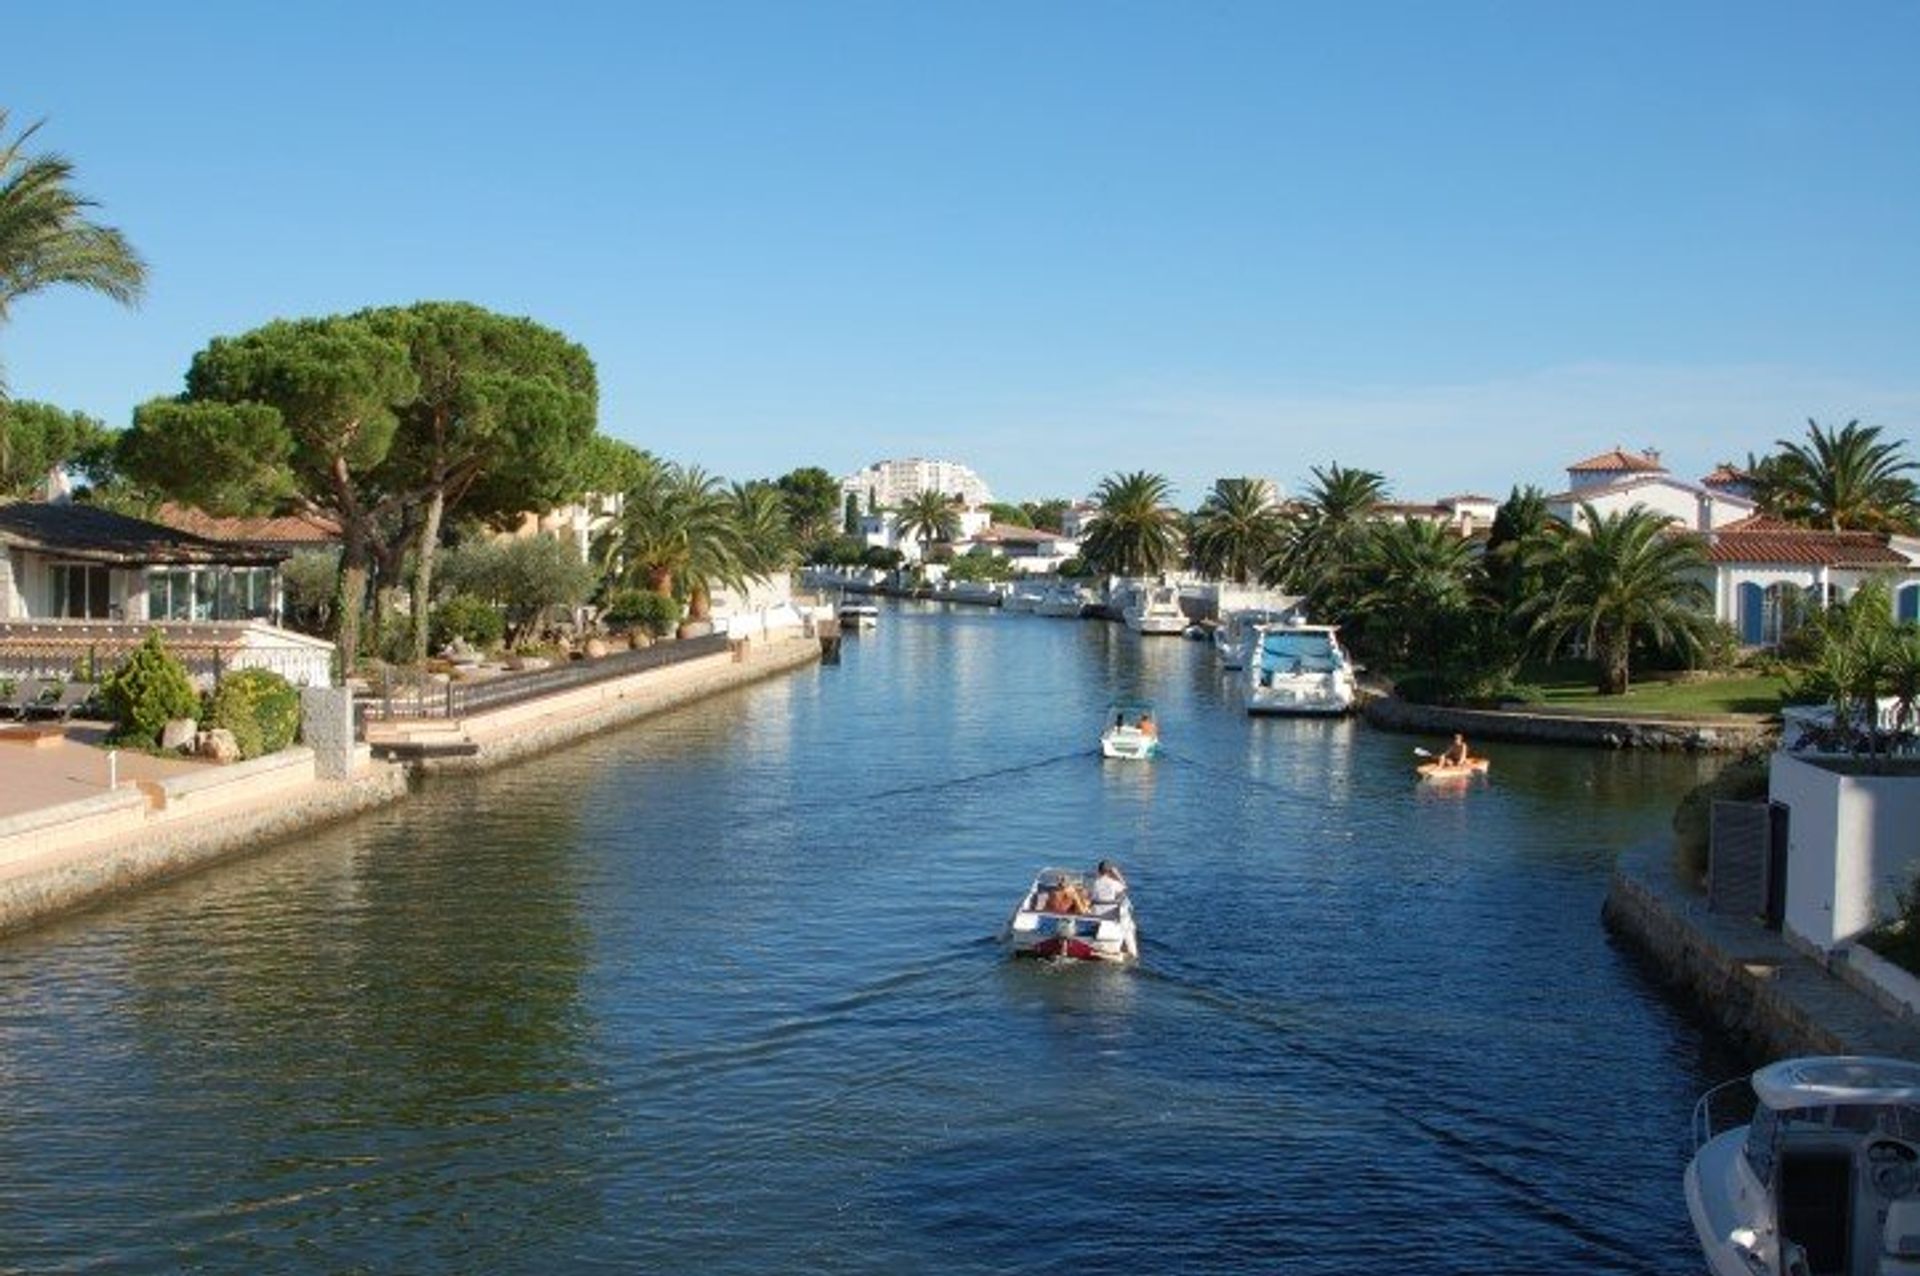 Explore the Venice of the Costa Brava with a boat tour, or hire a boat and discover Empuriabrava your way